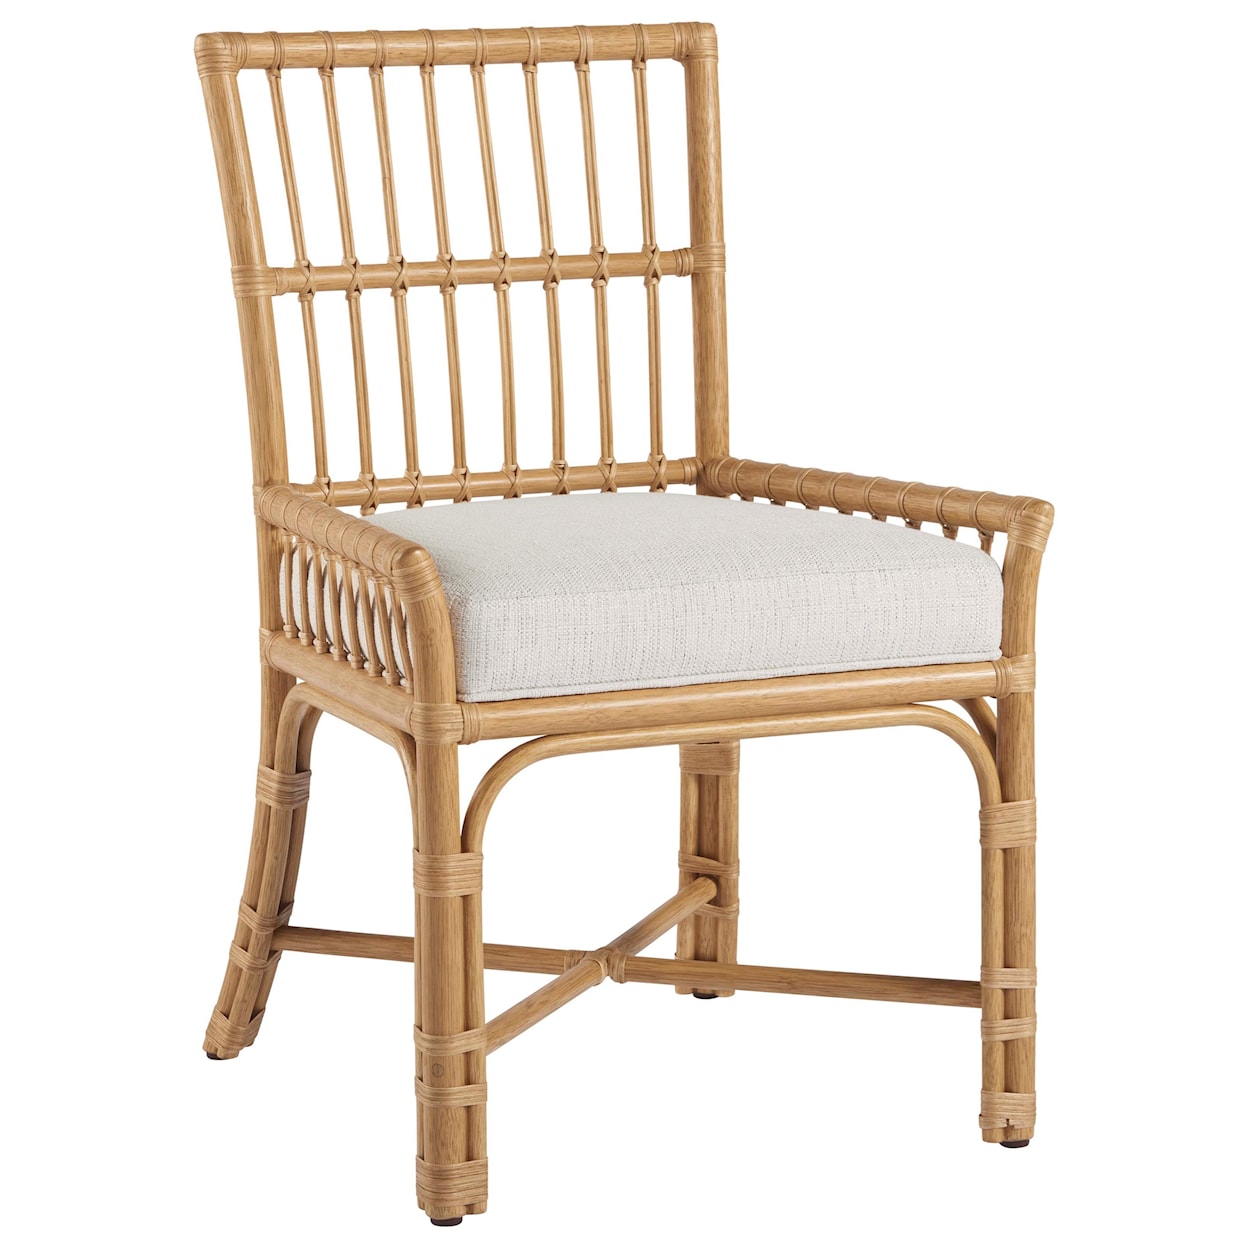 Universal Escape-Coastal Living Home Collection Clearwater Low-Arm Chair